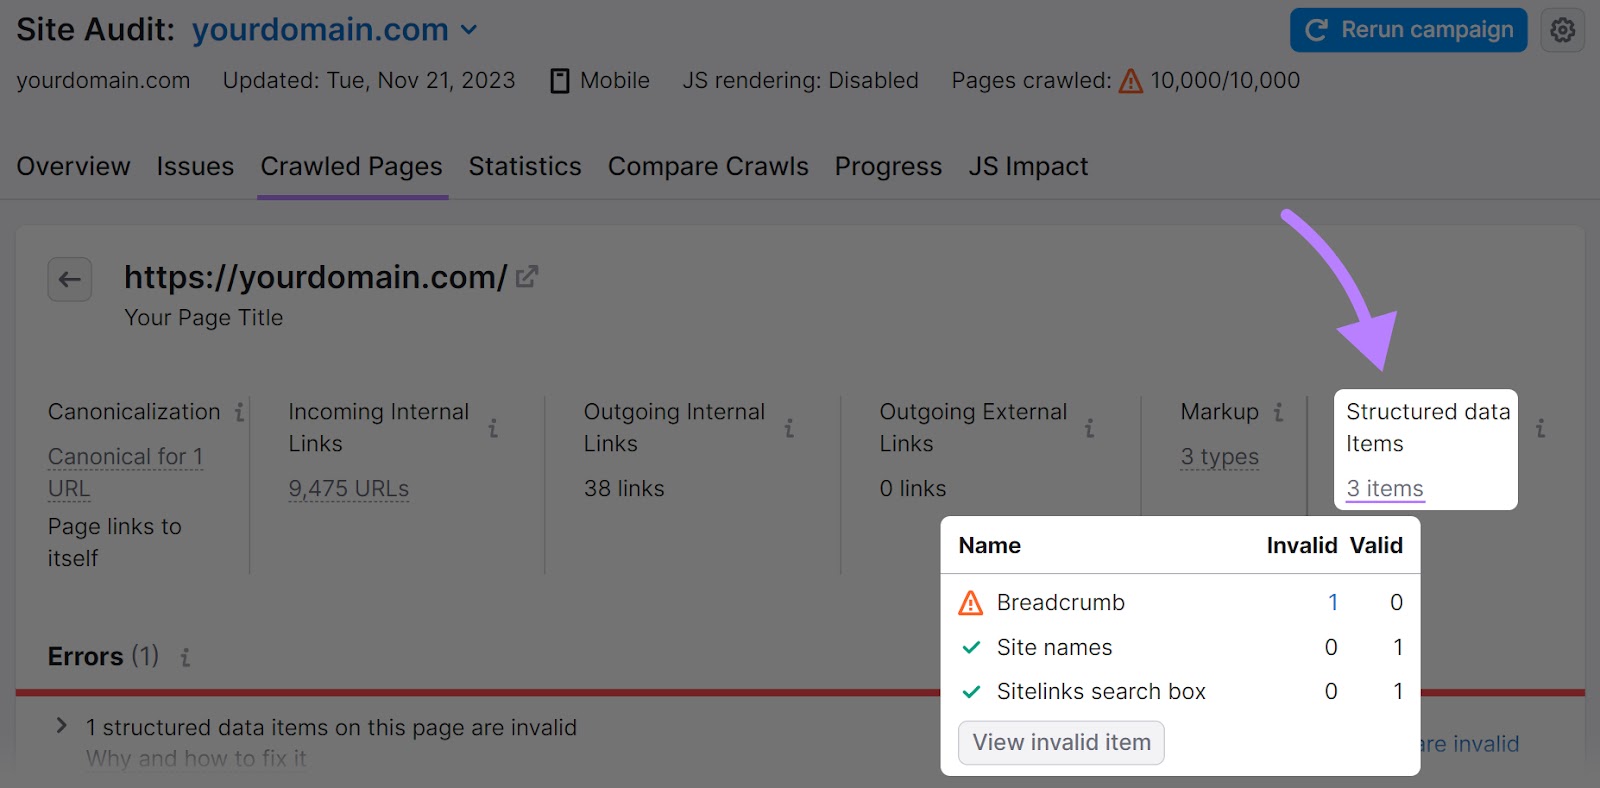 Structured data items issues in Site Audit tool